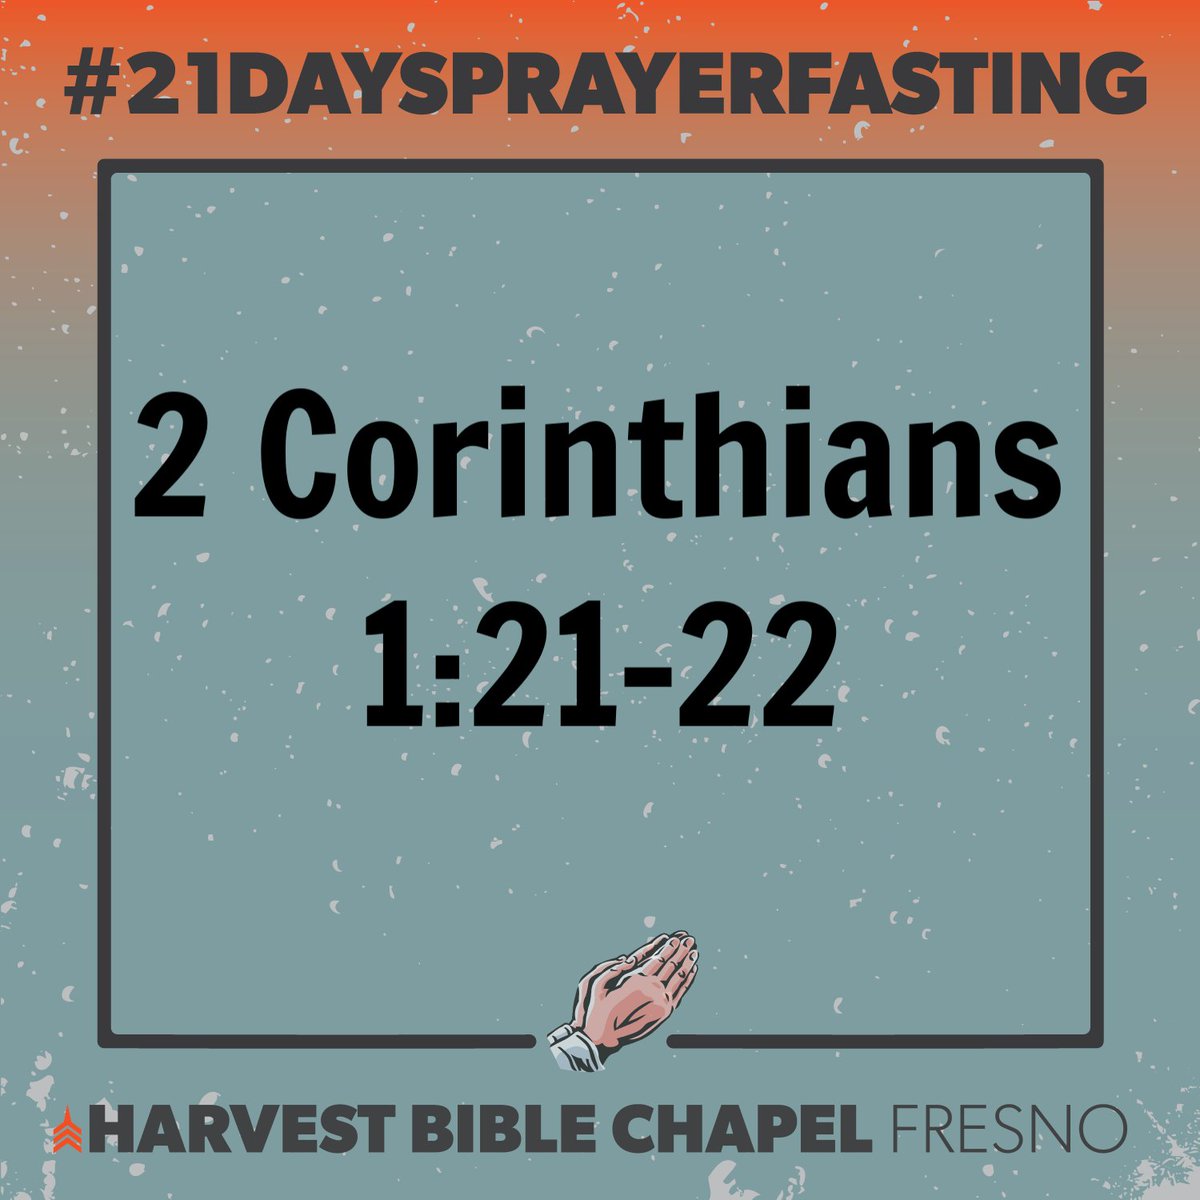 Let's offer prayers of gratitude. How amazing is it that He gave us His Spirit and that it is but deposit f what is to come? #21DaysPrayerFasting #Prayer #Fasting #Fresno